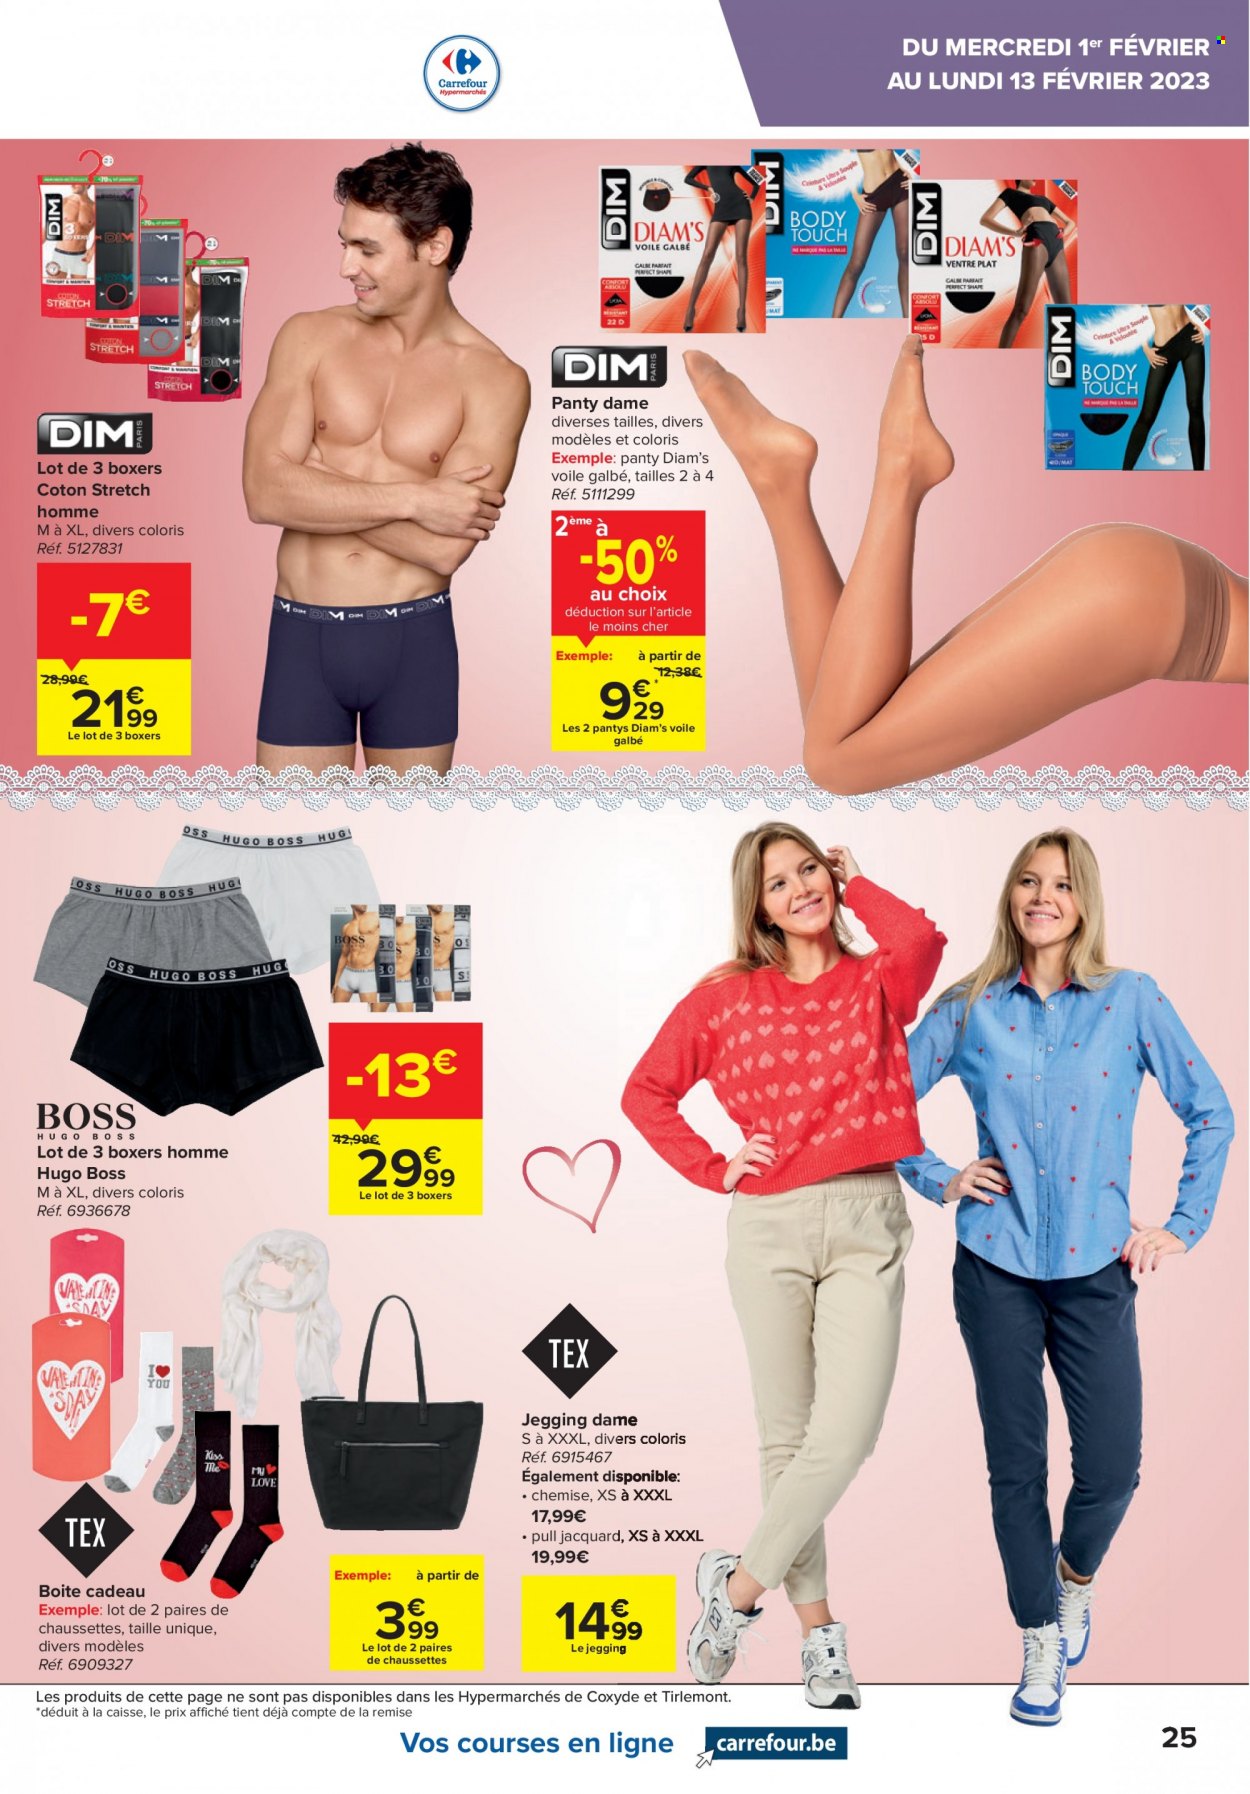 Catalogue Carrefour hypermarkt - 1.2.2023 - 13.2.2023. Page 25.